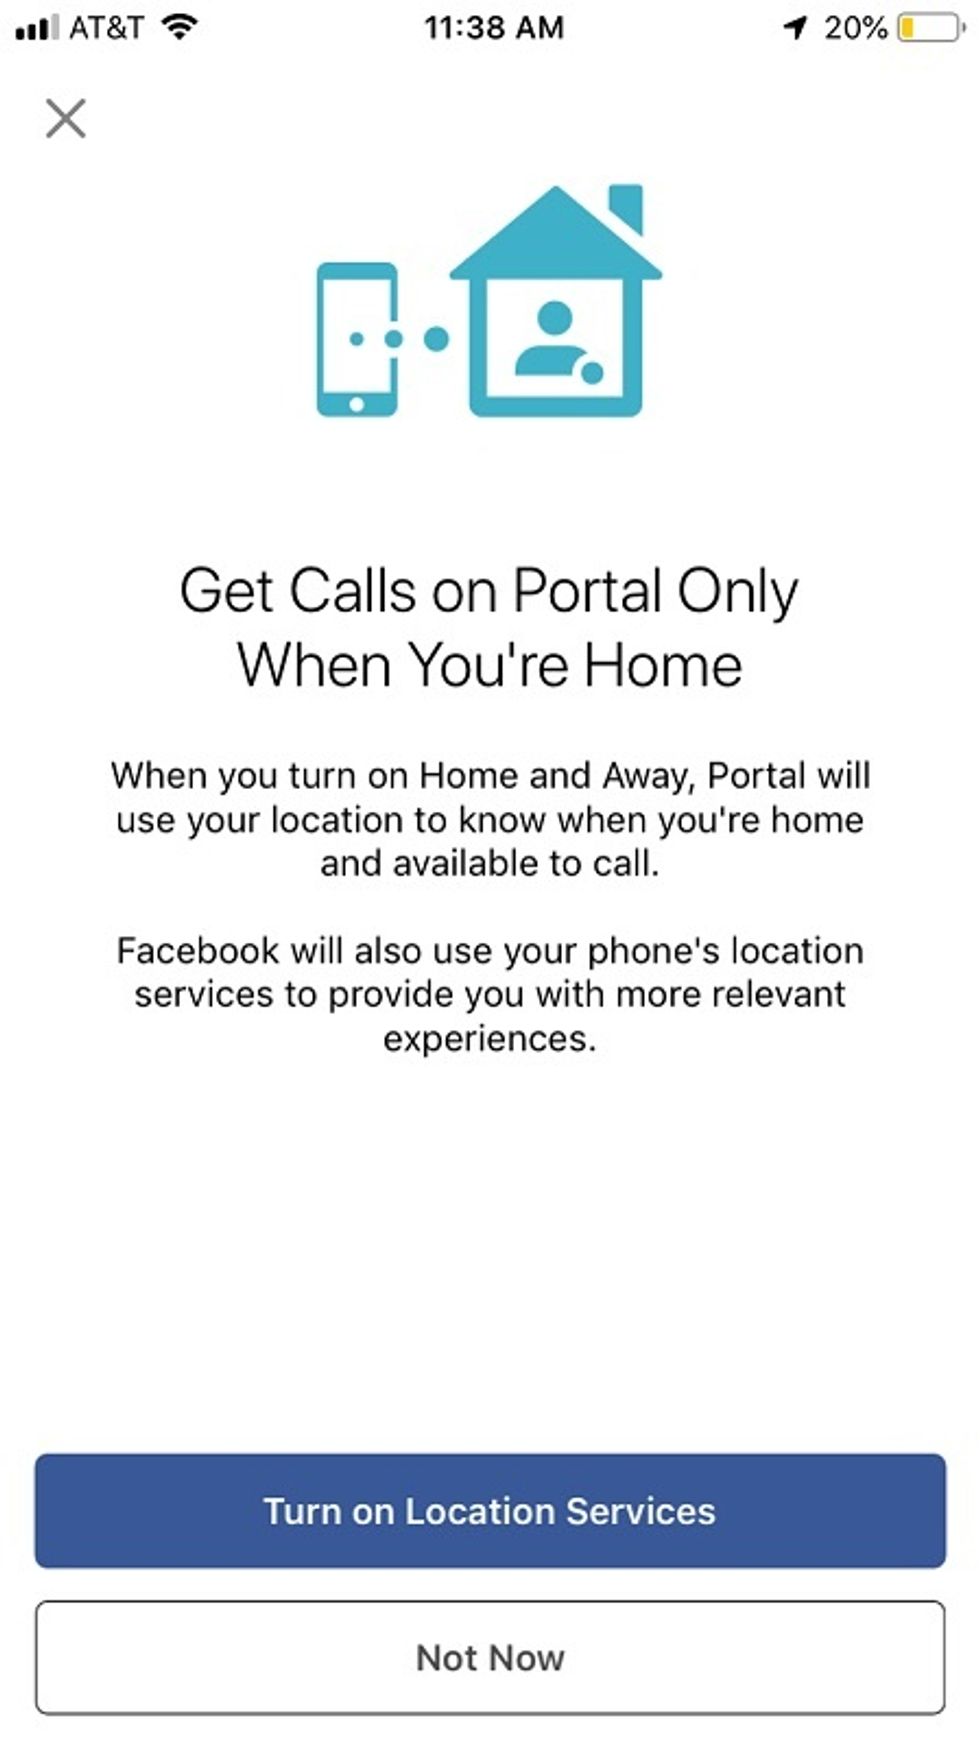 Picture of facebook portal app for setting up calls